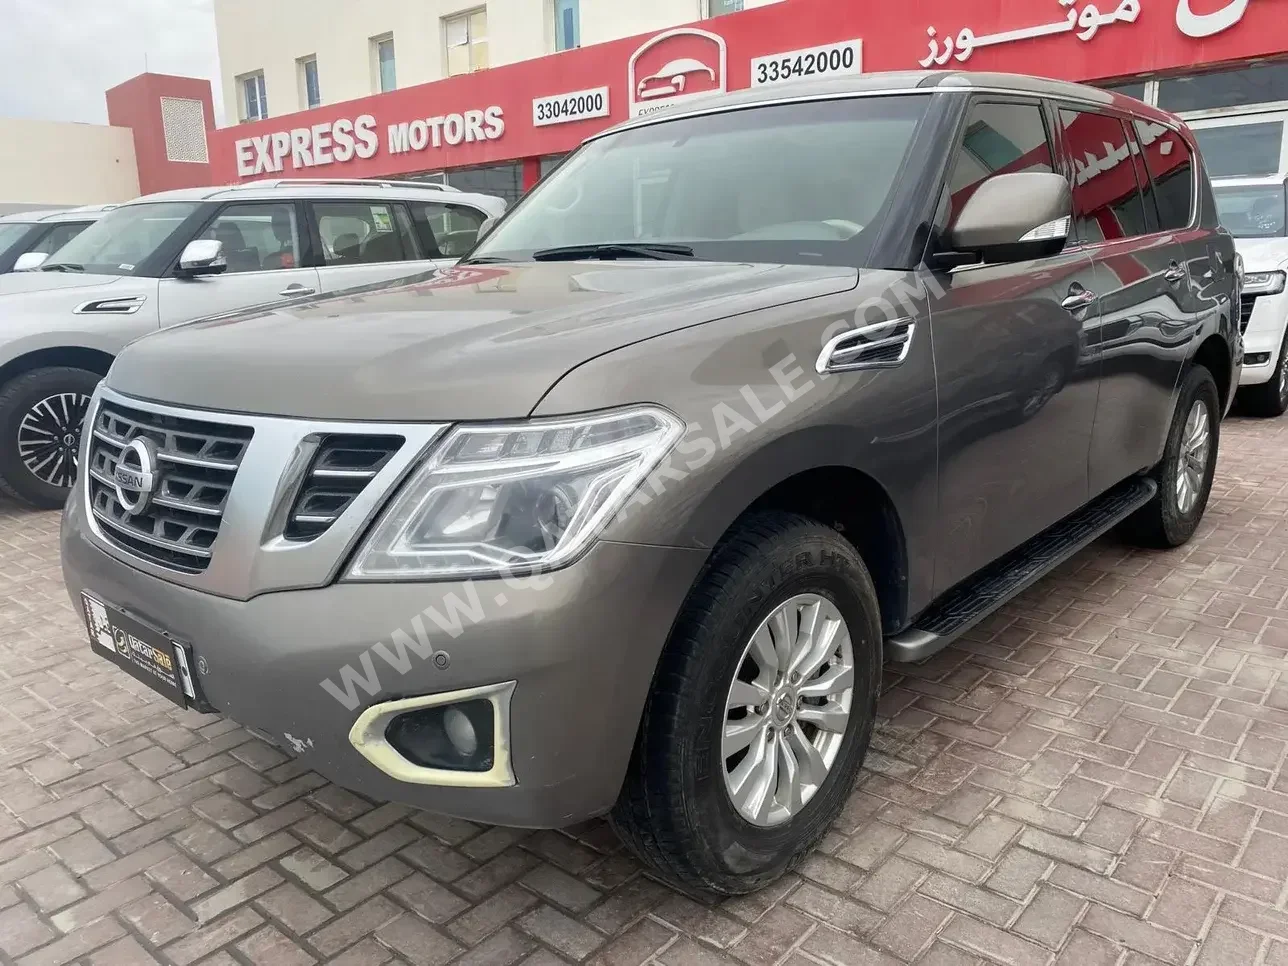 Nissan  Patrol  SE  2017  Automatic  175,000 Km  6 Cylinder  Four Wheel Drive (4WD)  SUV  Brown